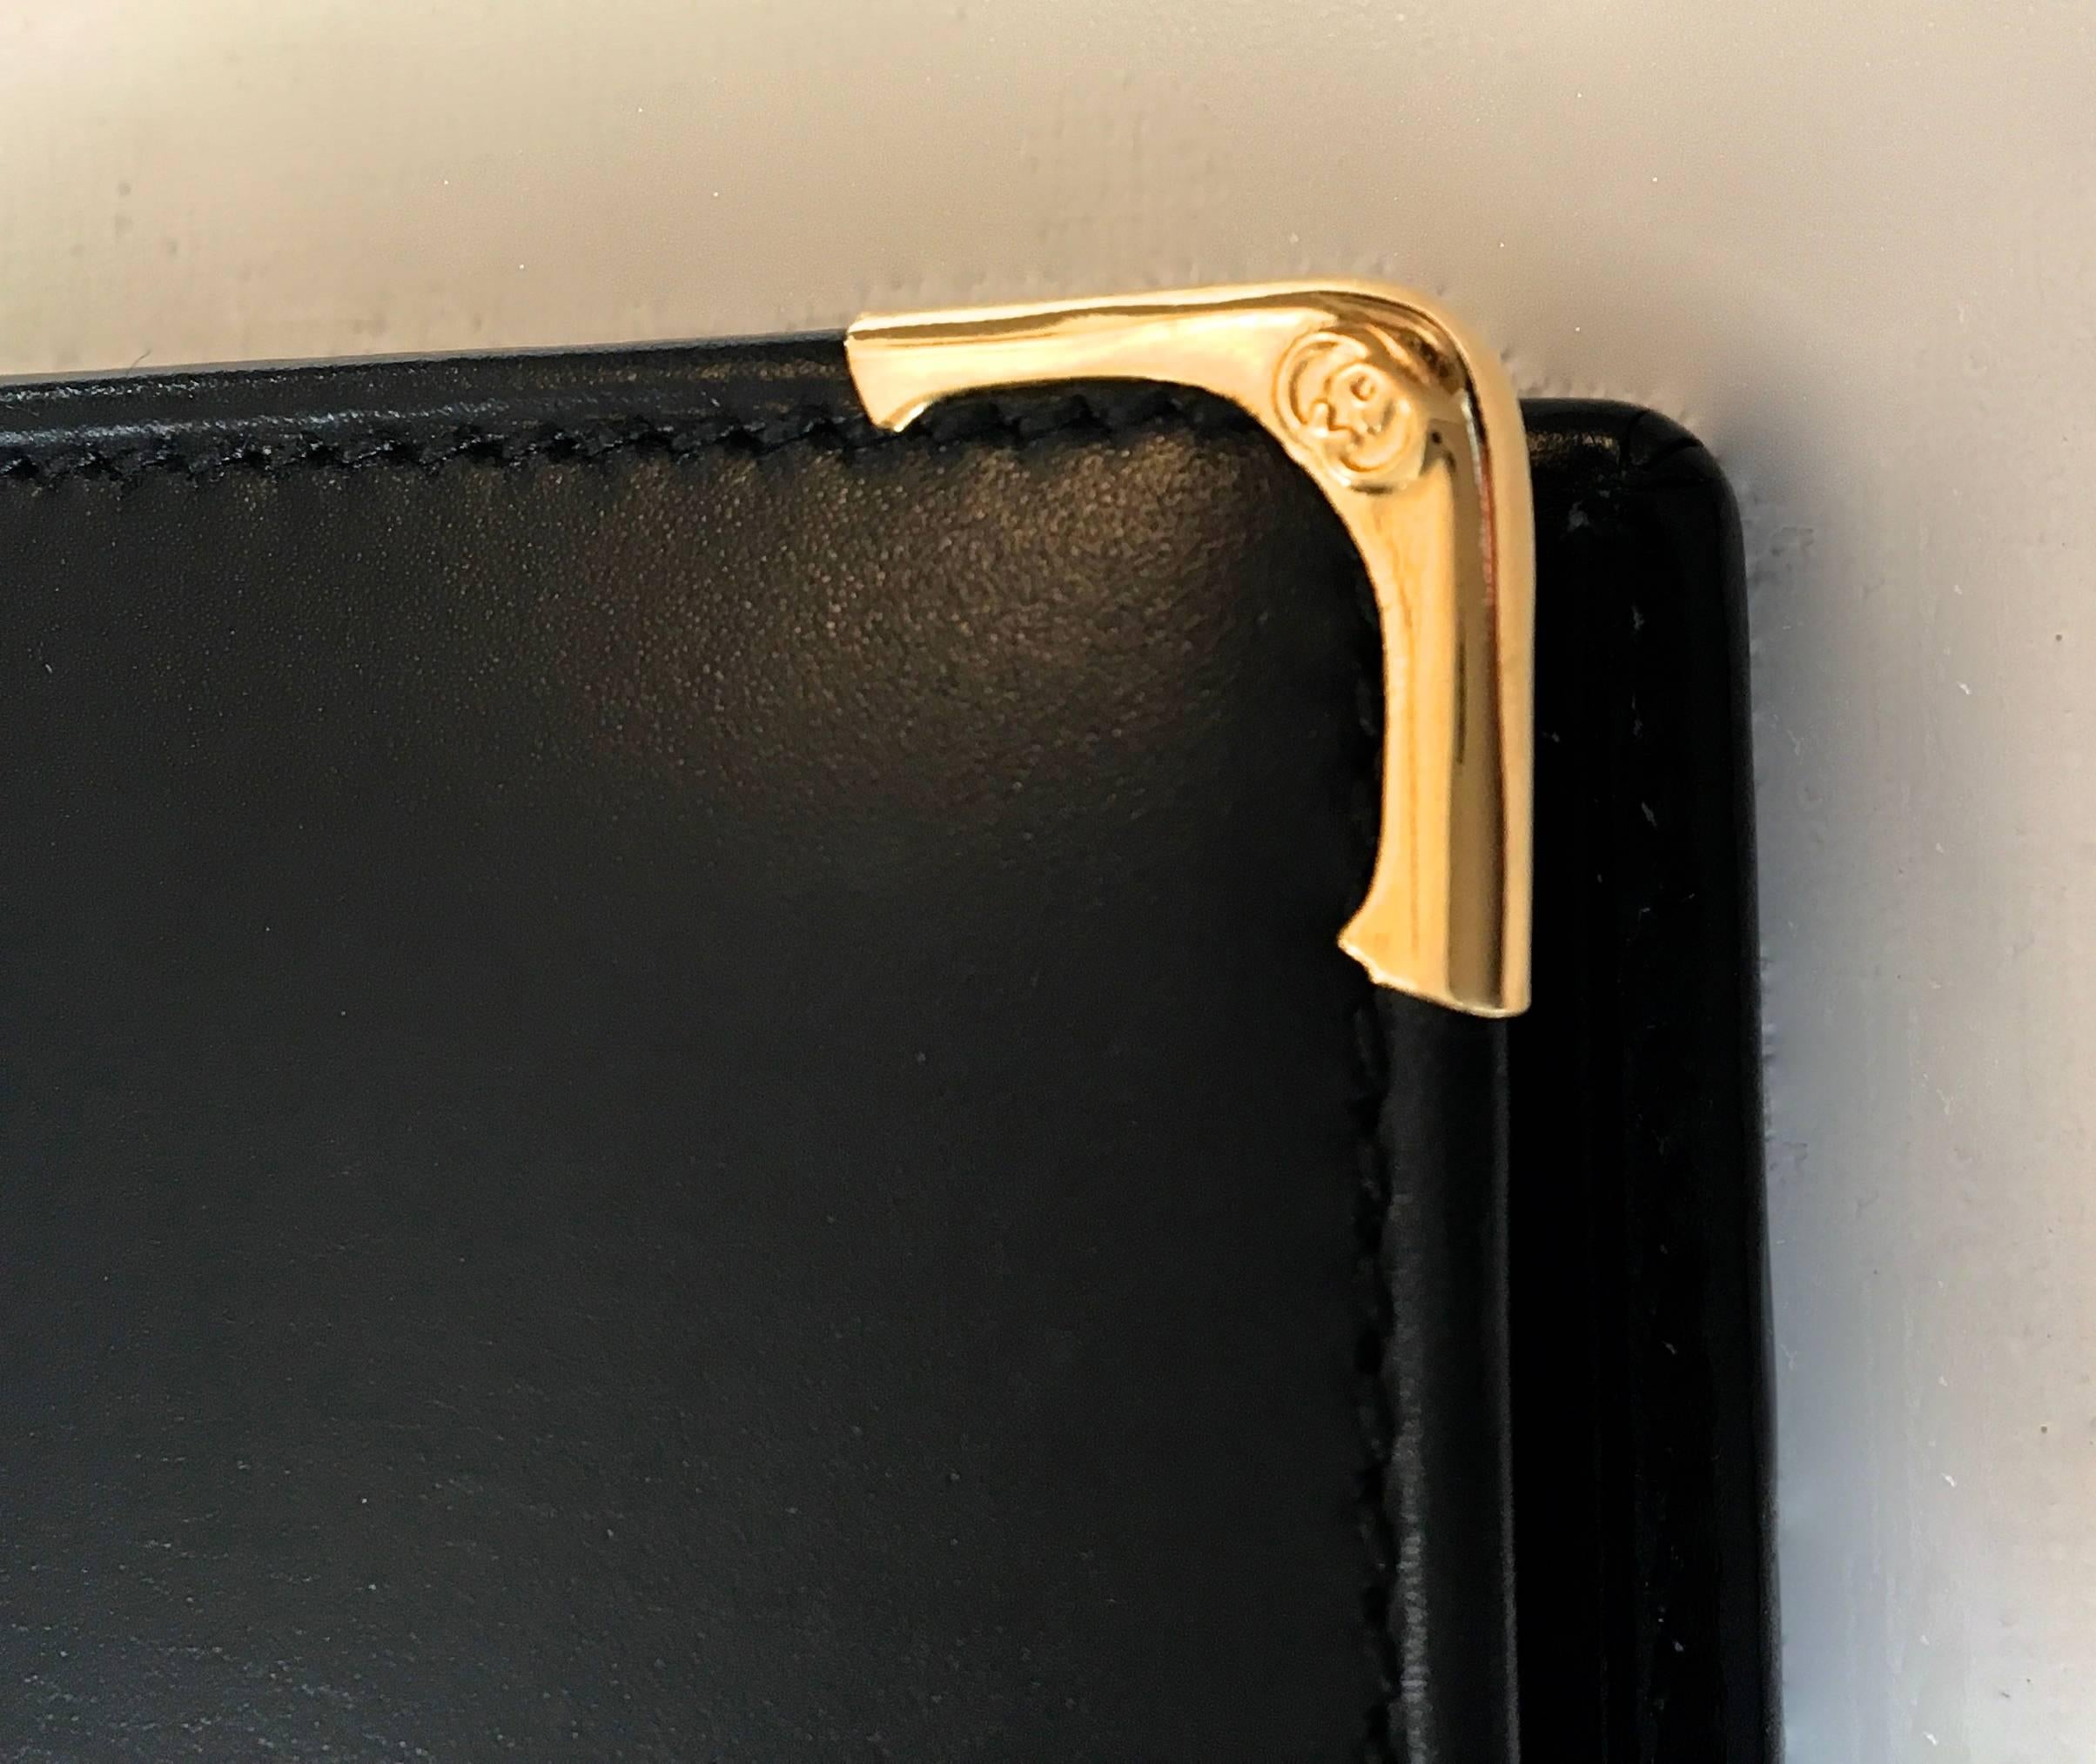 Presented here is a stunning vintage 1980’s Gucci passport holder / business wallet. The case is comprised of black leather on throughout the wallet. The wallet has sufficient room to hold a passport, money of varying sizes, business cards, credit